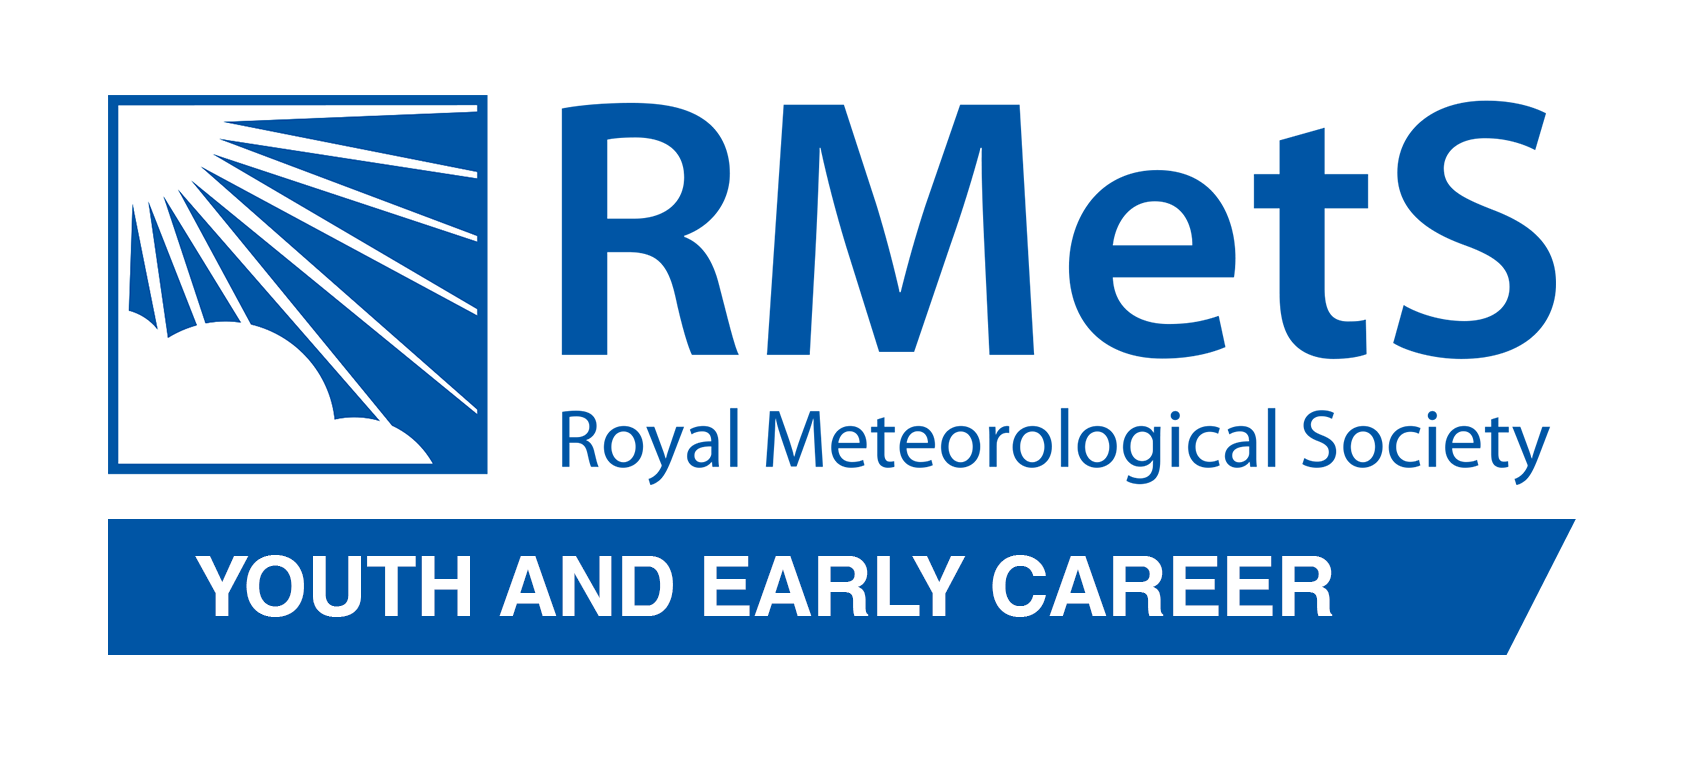 Royal Meteorological Society Youth and Early Career Special Interest Group logo